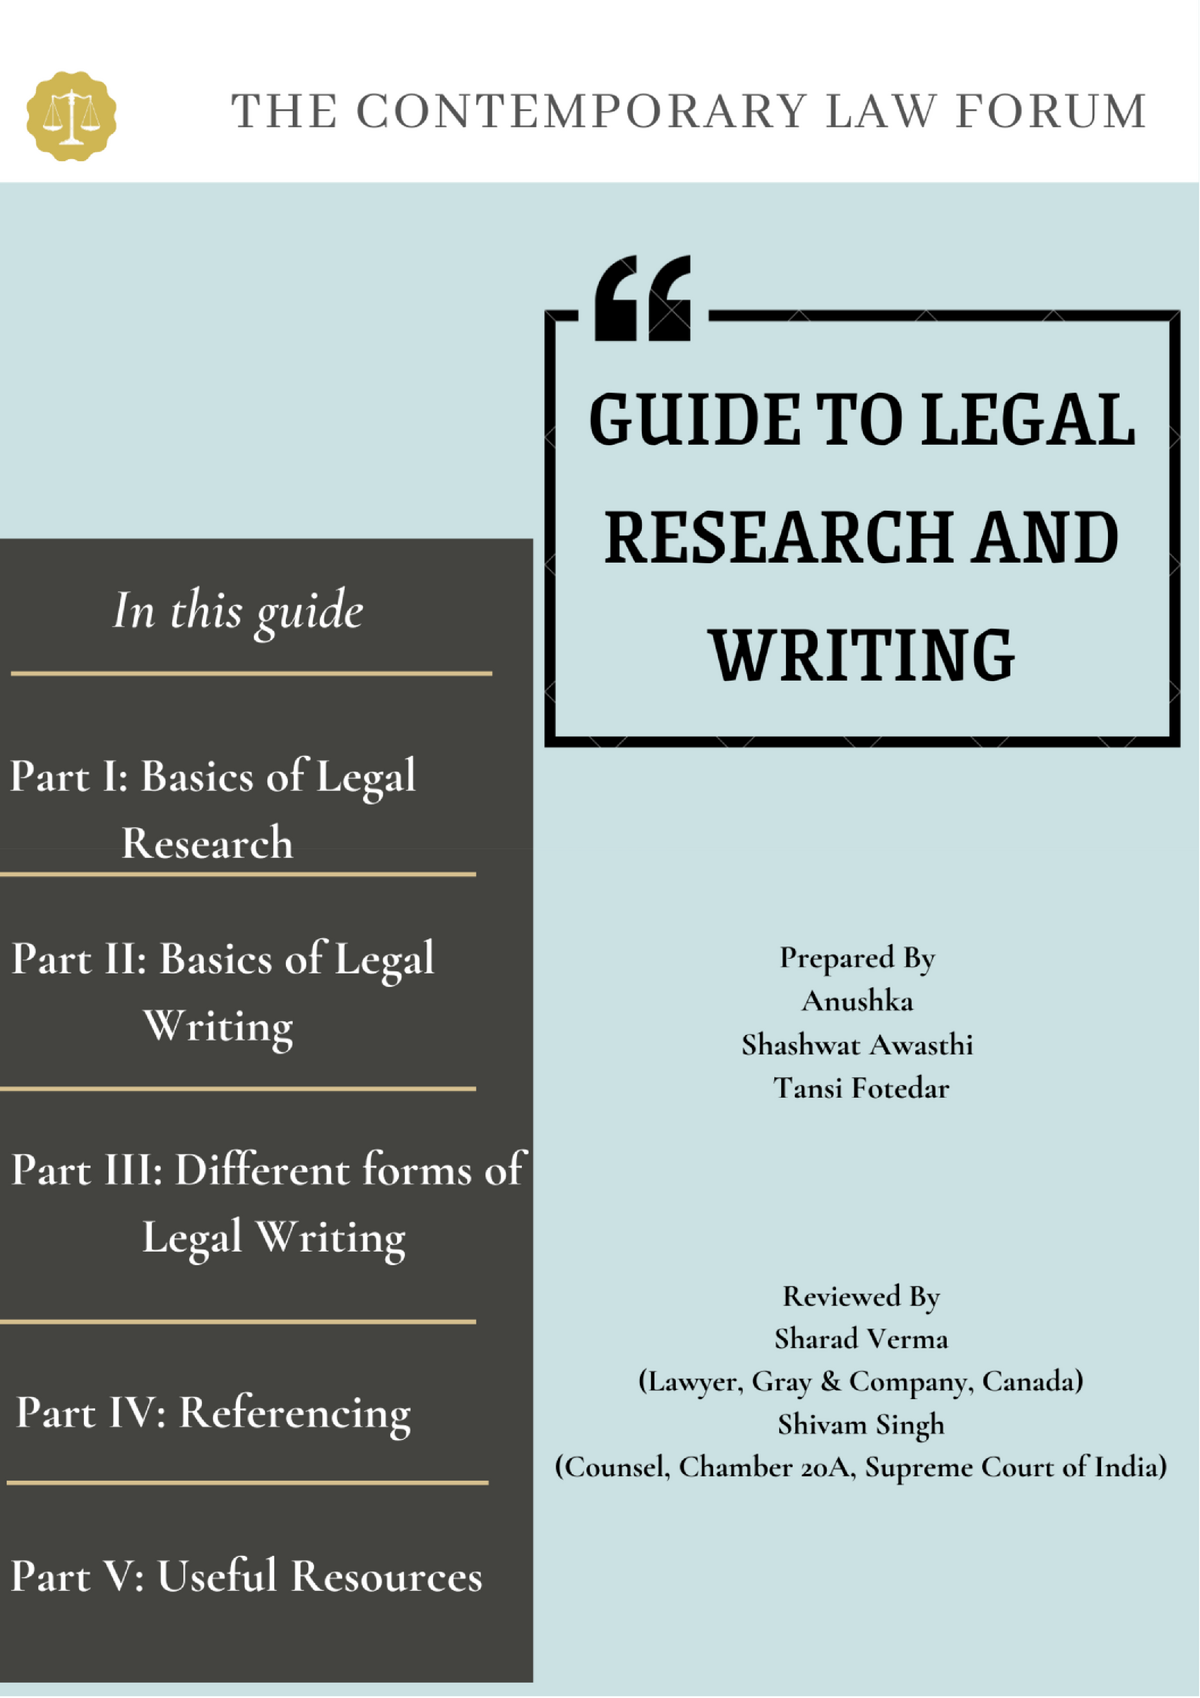 legal analysis research and writing